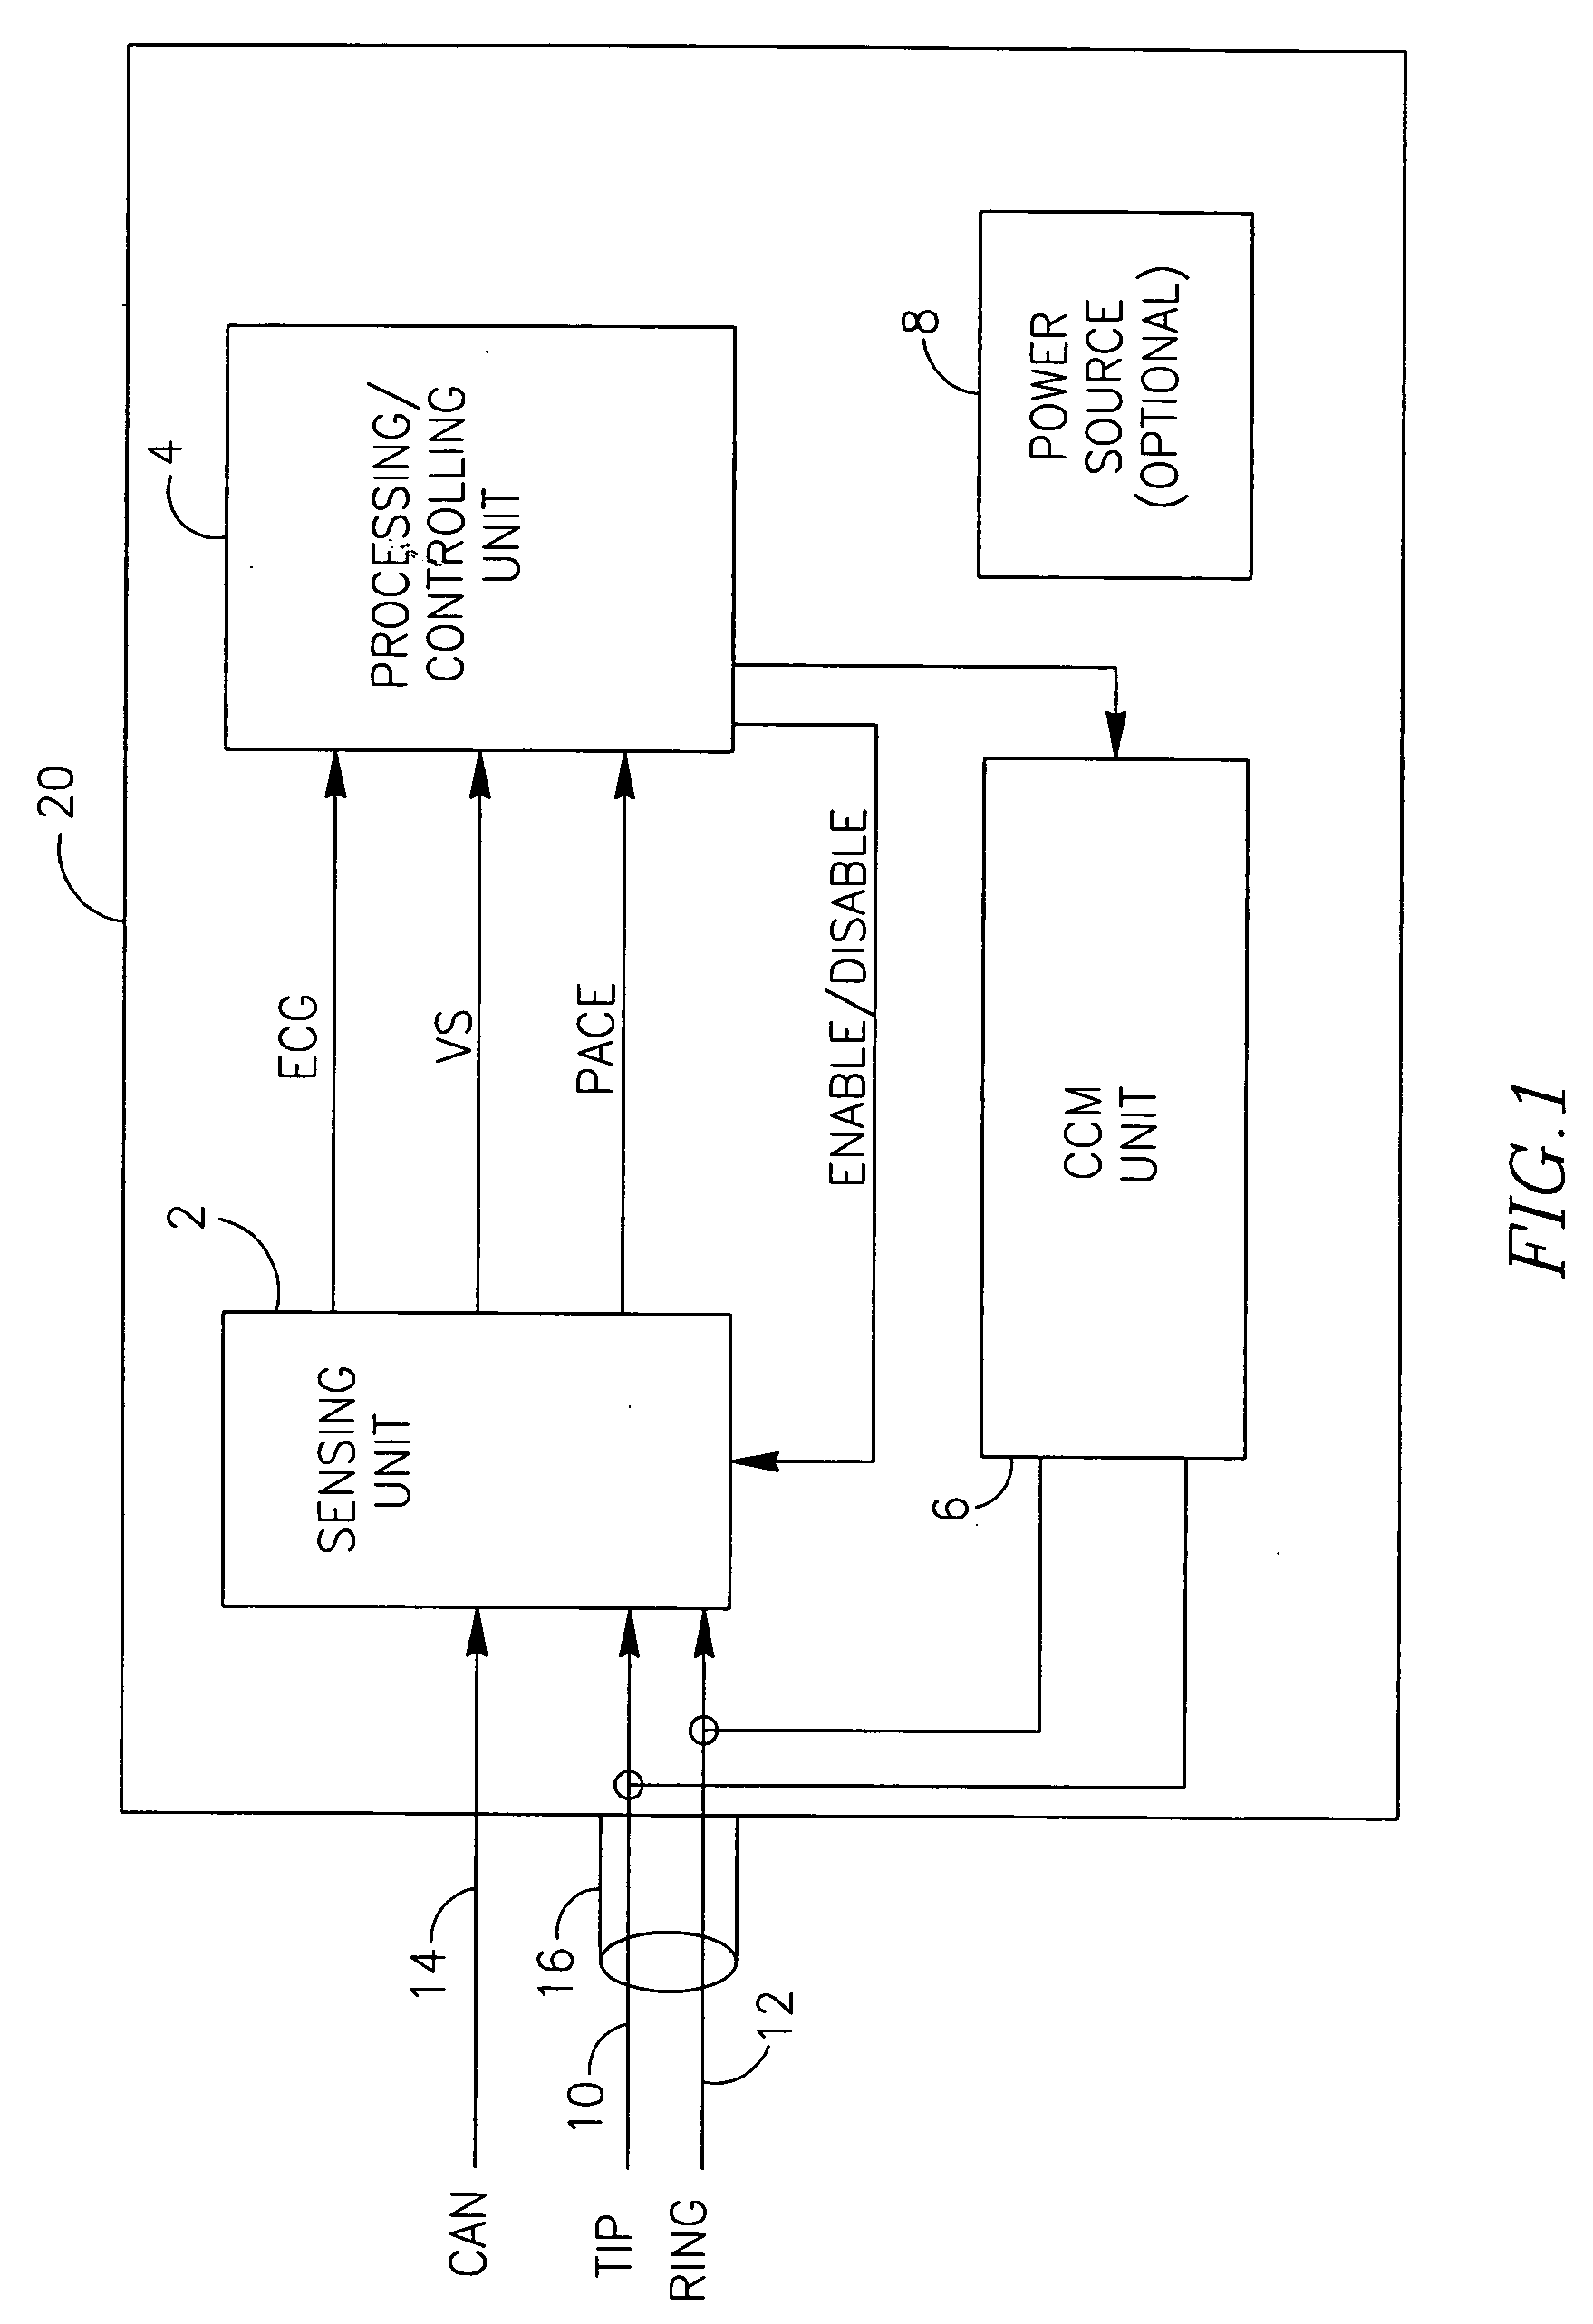 Apparatus and Method for Delivering Electrical Signals to a Heart